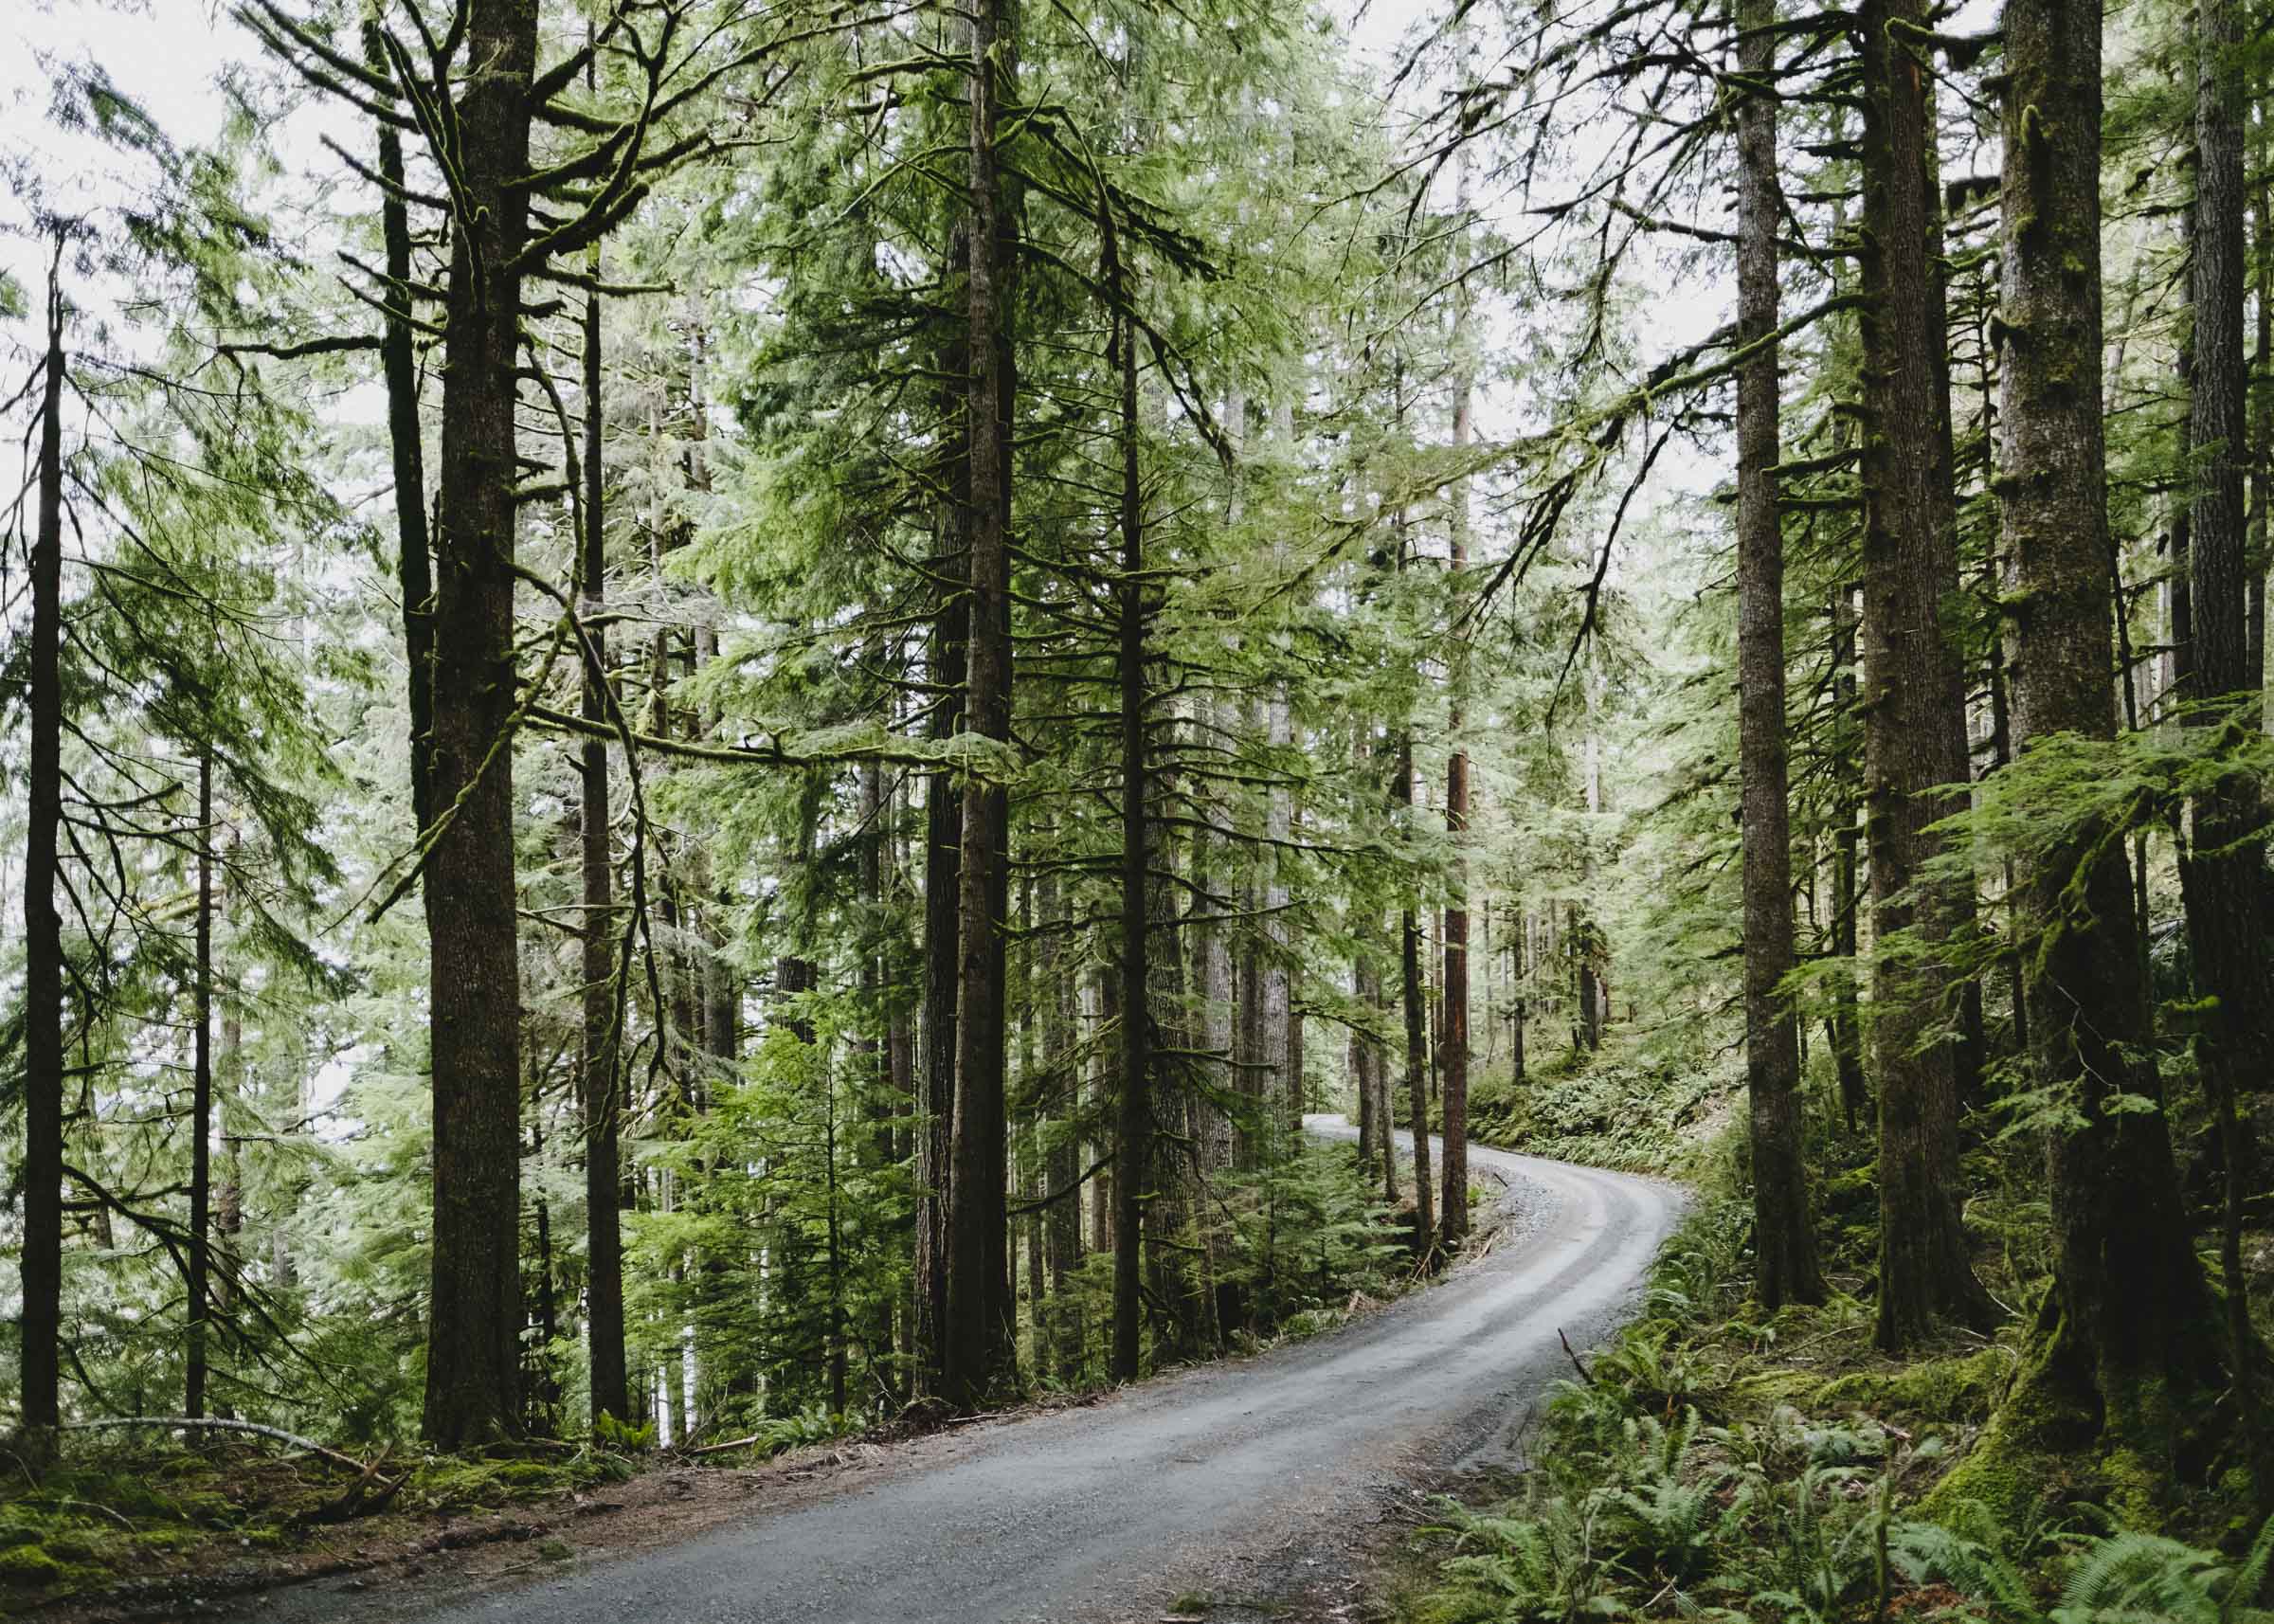 Roadtrips through the evergreen forests of Washington state